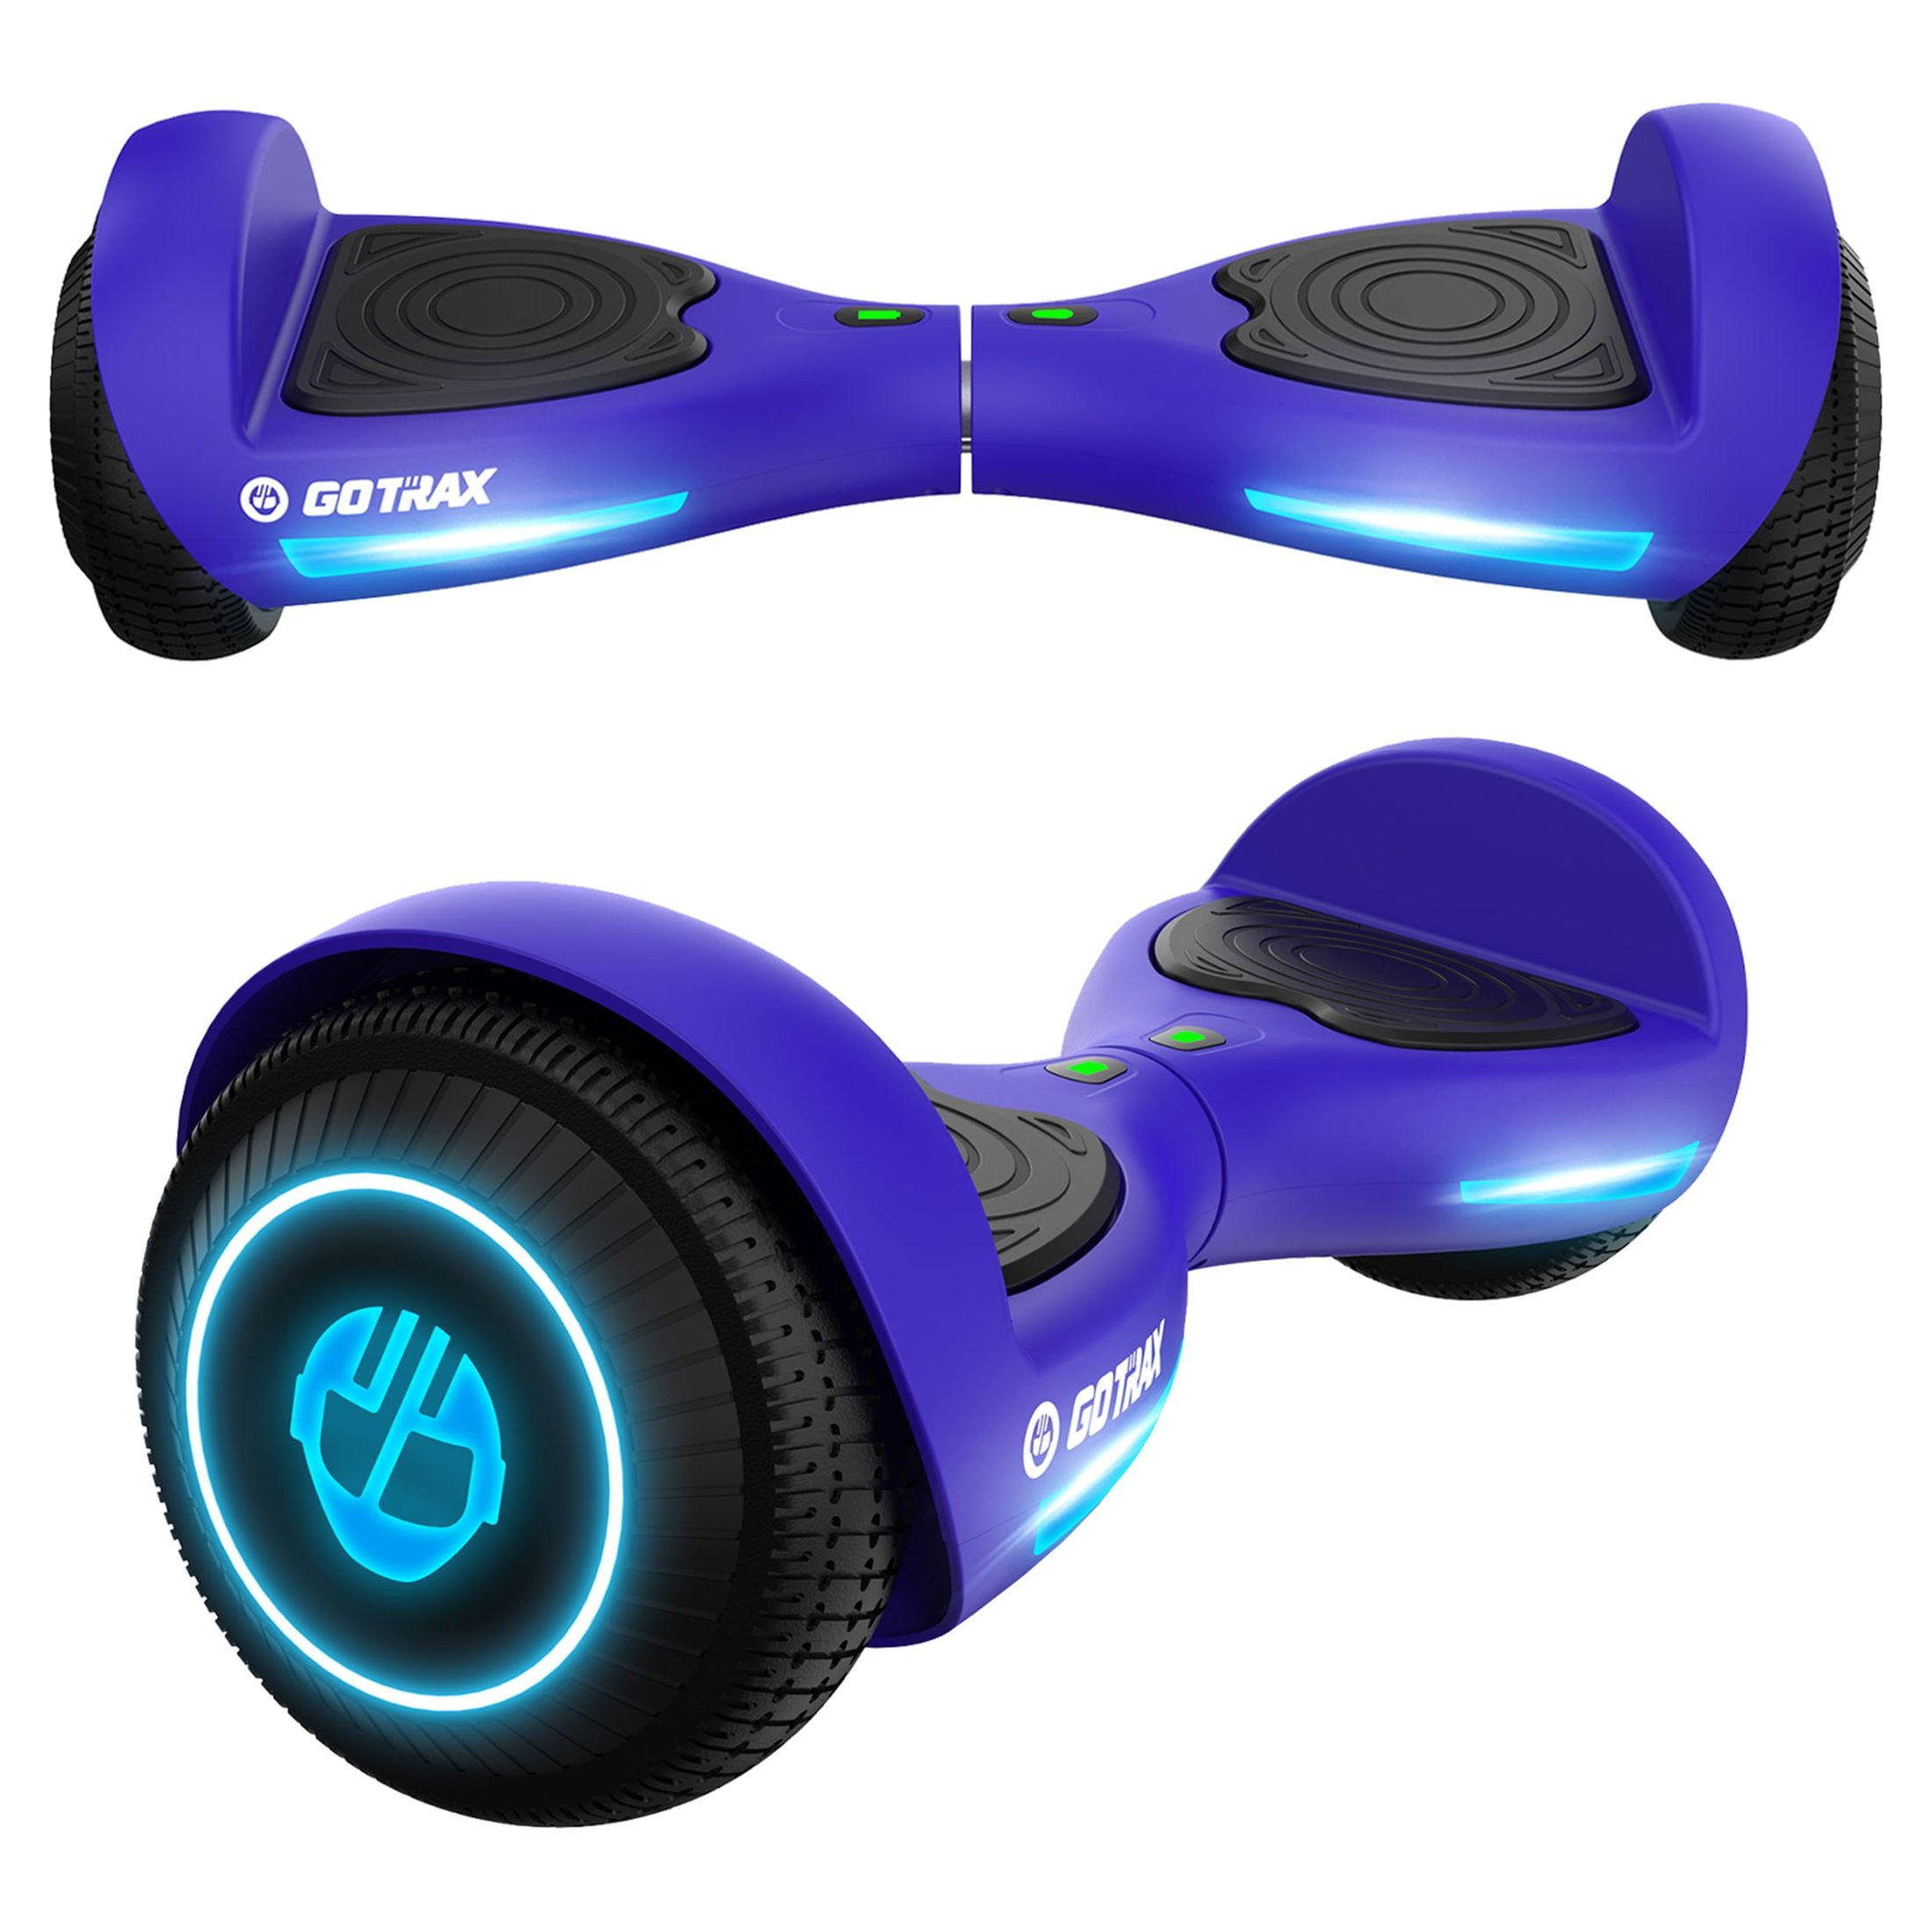 GOTRAX FX3 Hoverboard for Kids Adults,200W Motor 6.5" LED Wheels 6.2mph Speed Hover Board, Blue - image 1 of 12